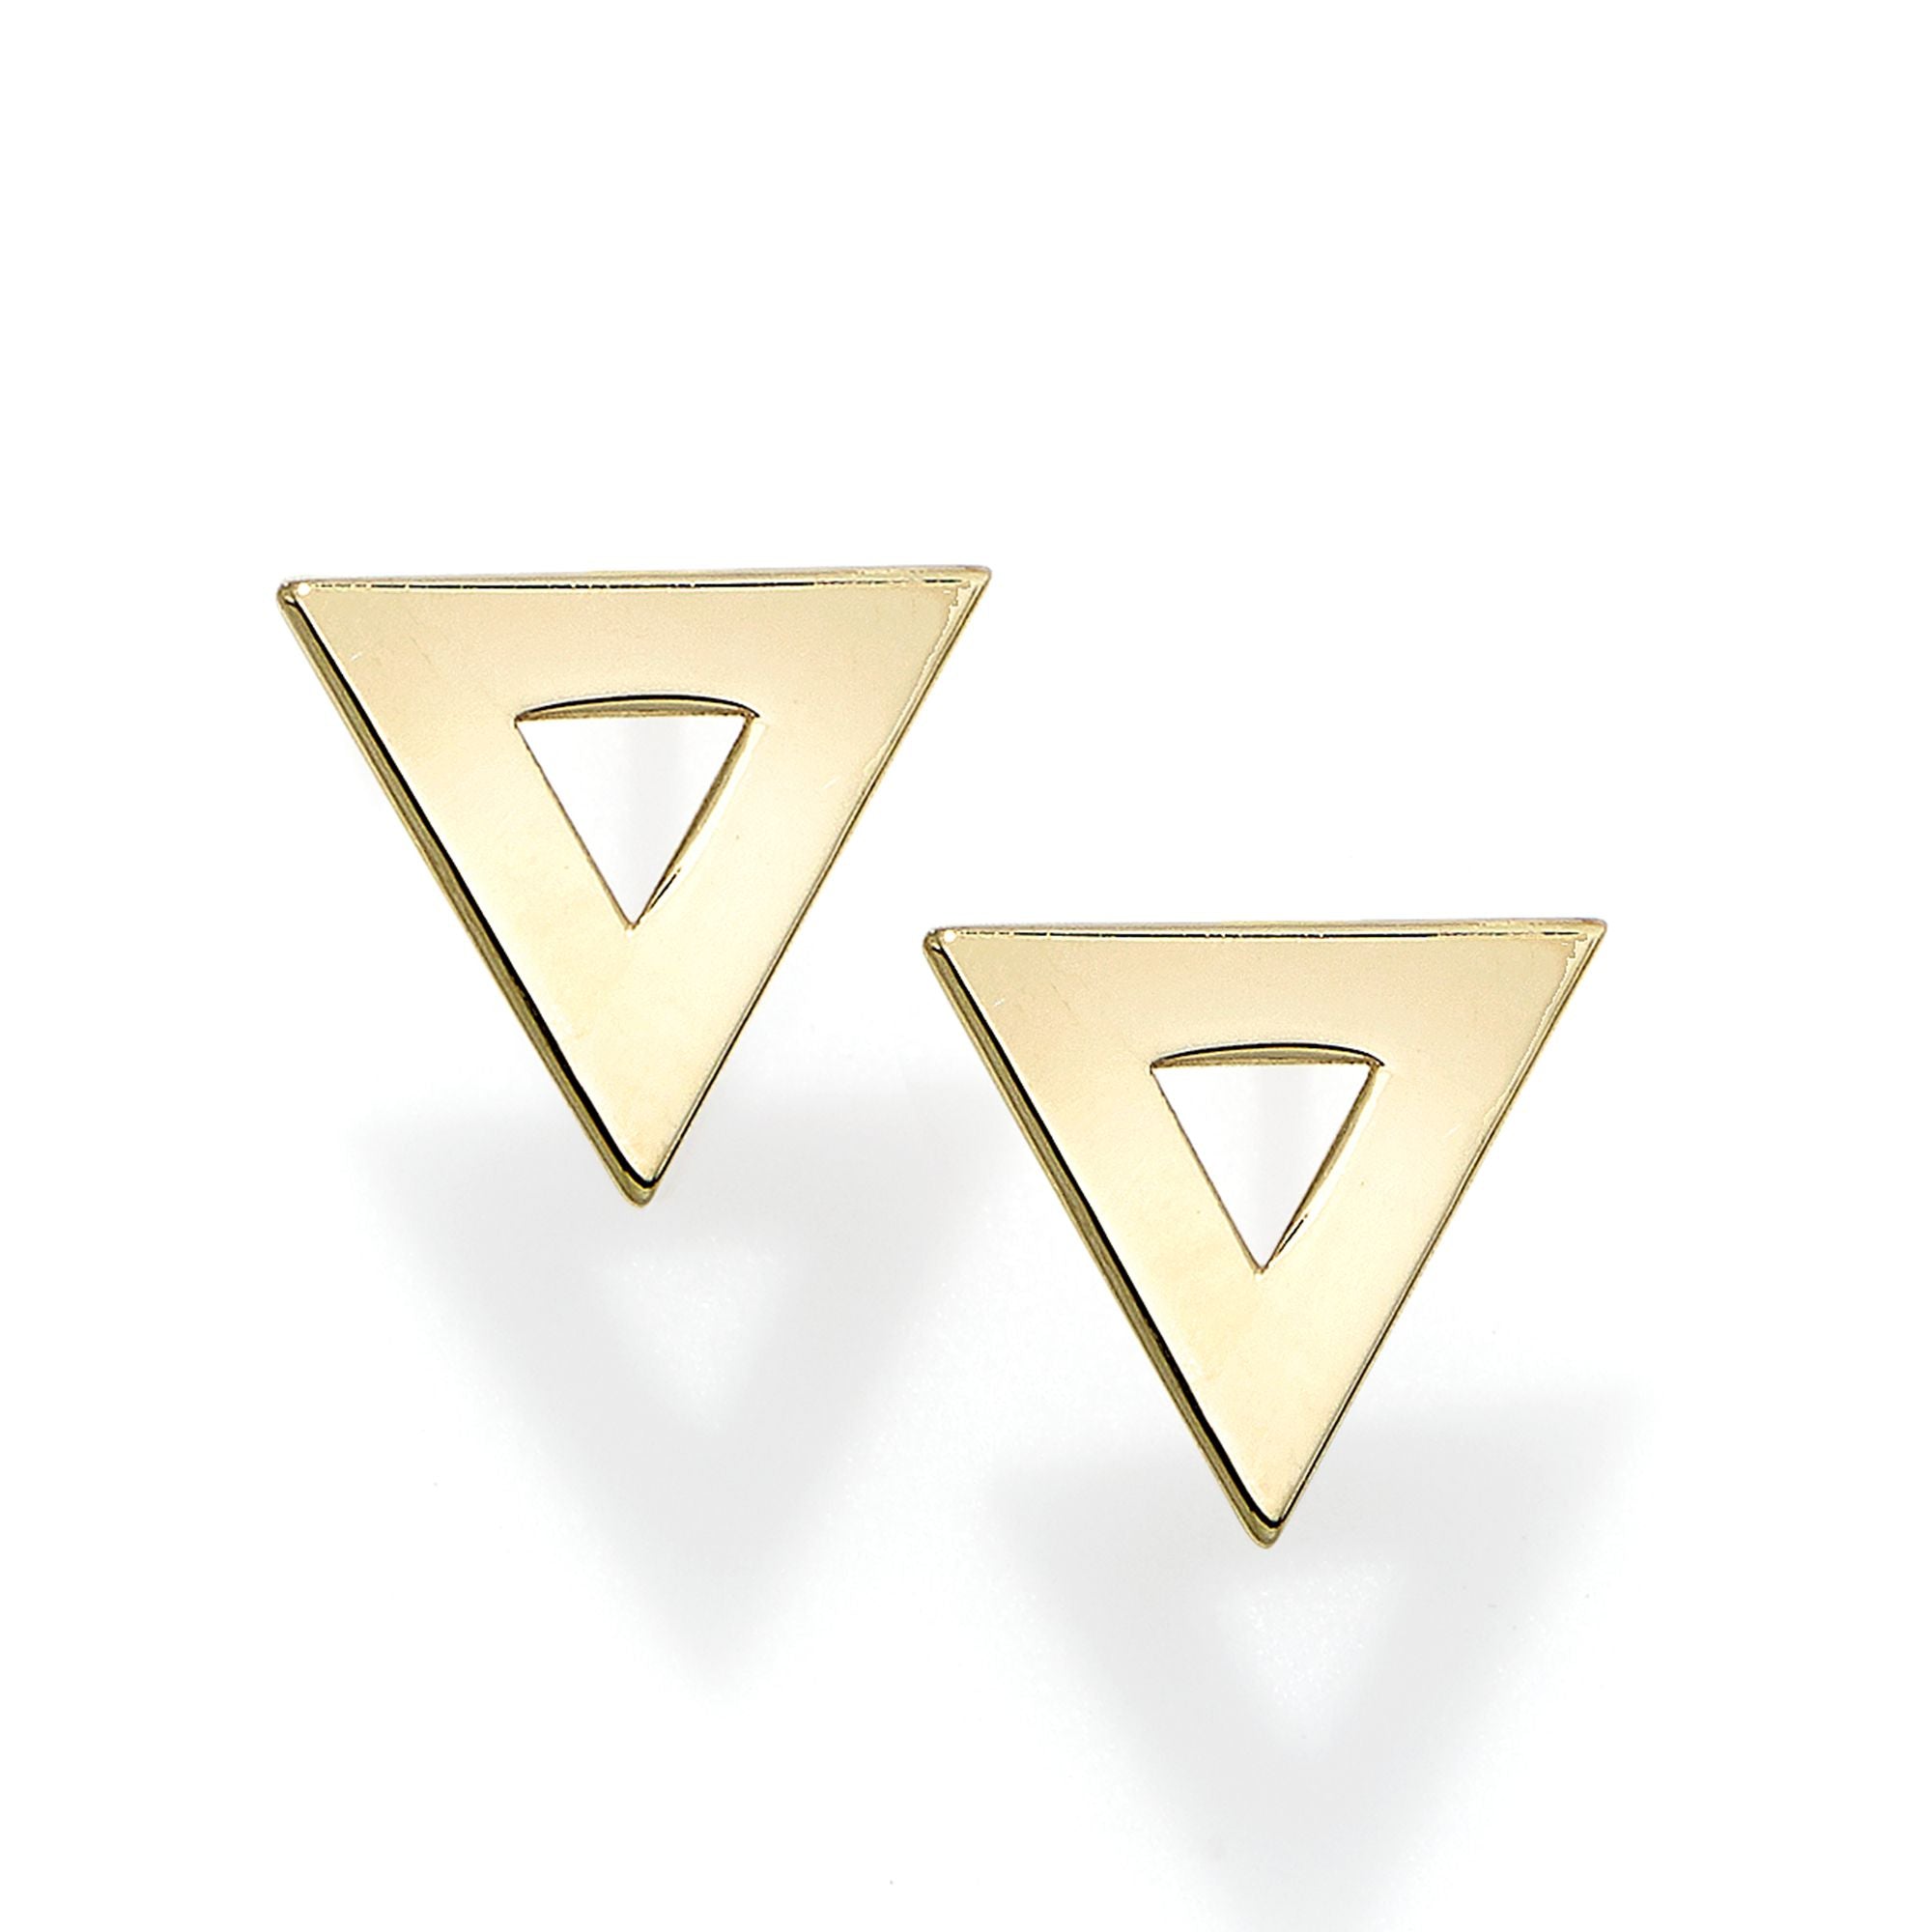 Minimalist Solid Gold Polished Triangle Post Stud Earrings with Push Back Clasp - wingroupjewelry